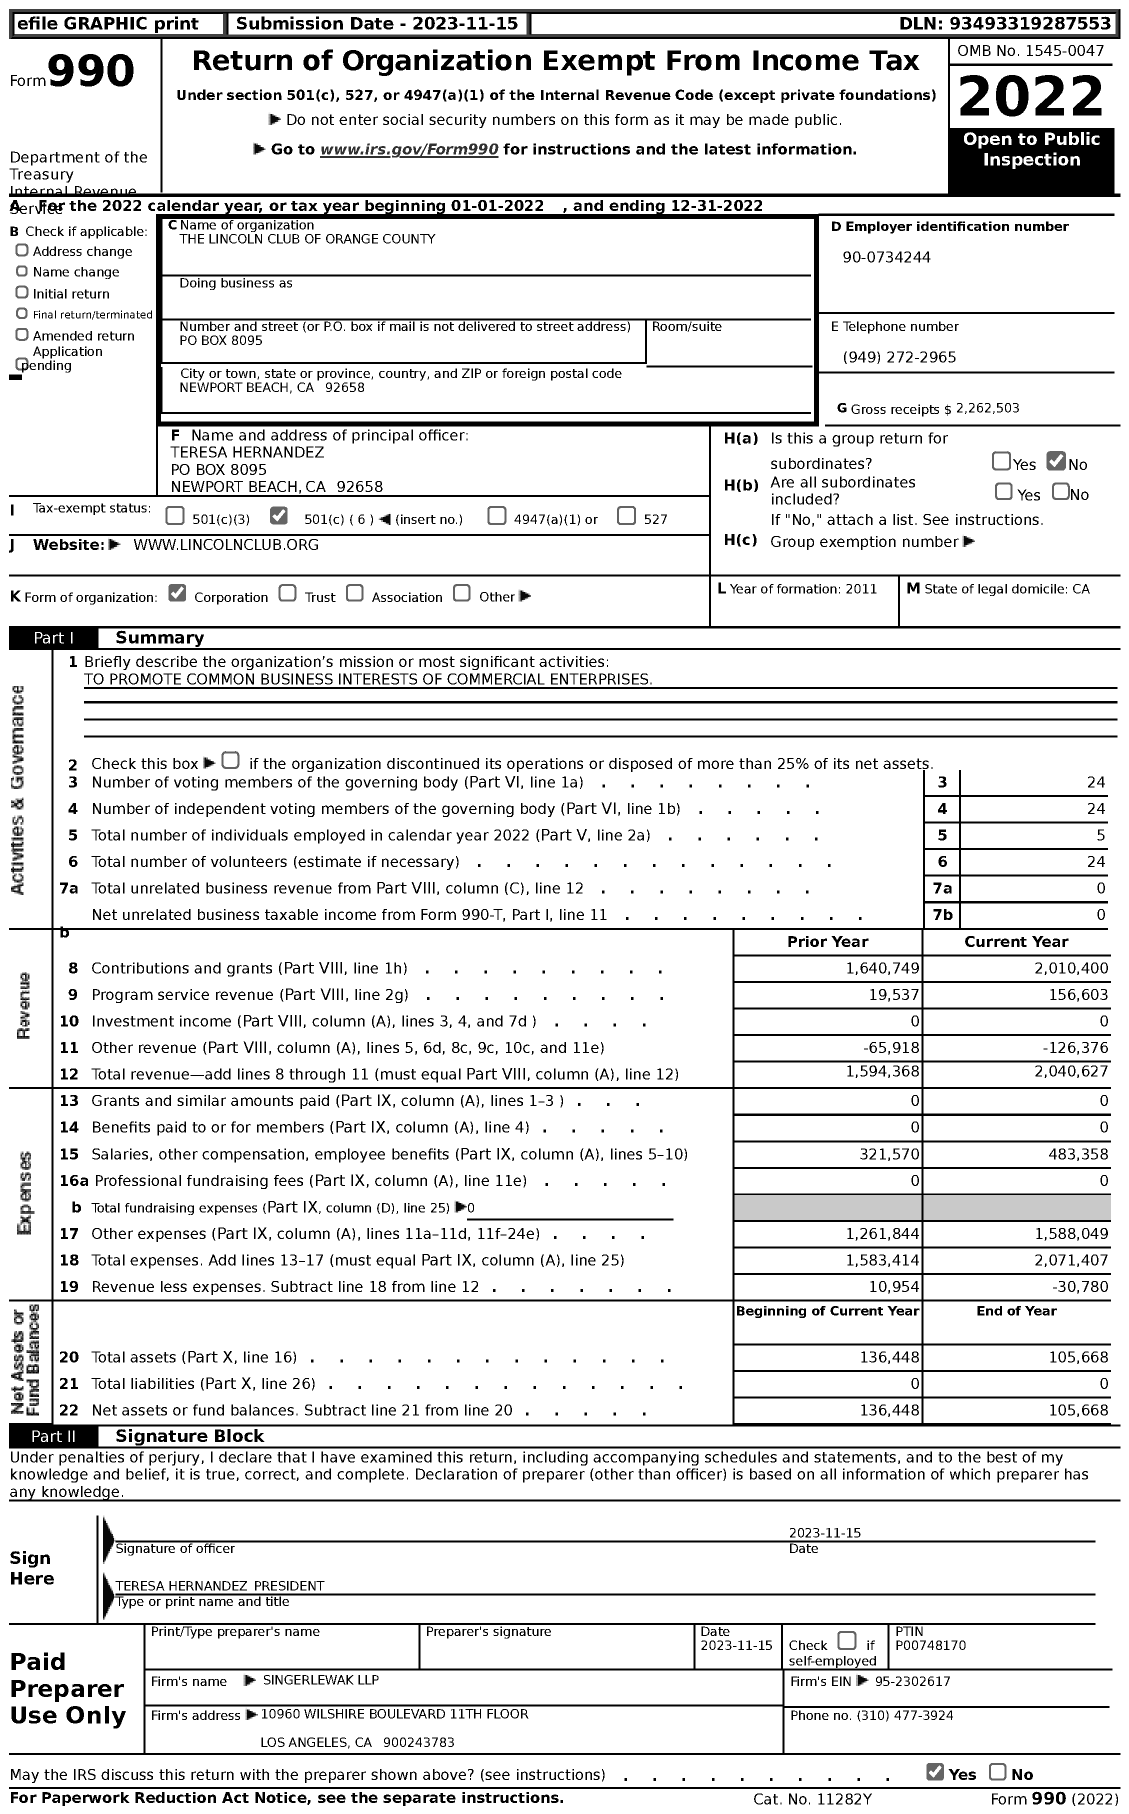 Image of first page of 2022 Form 990 for The Lincoln Club of Orange County